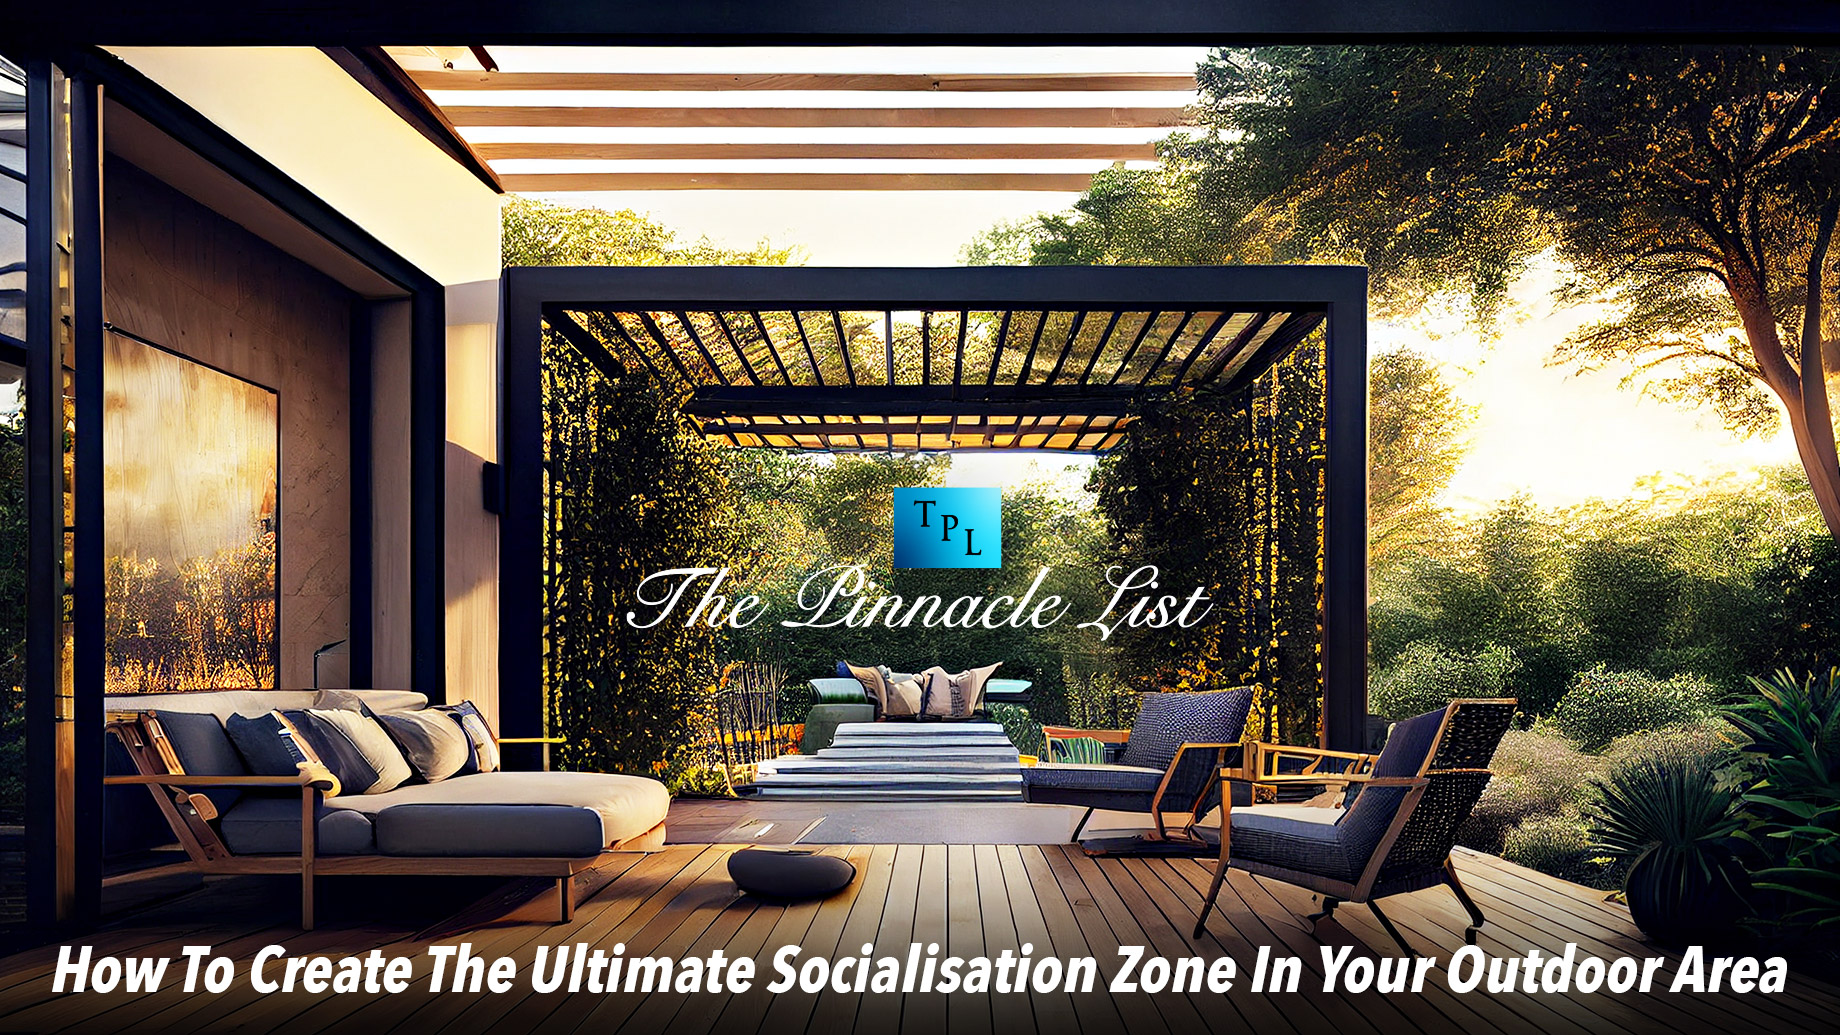 How To Create The Ultimate Socialisation Zone In Your Outdoor Area